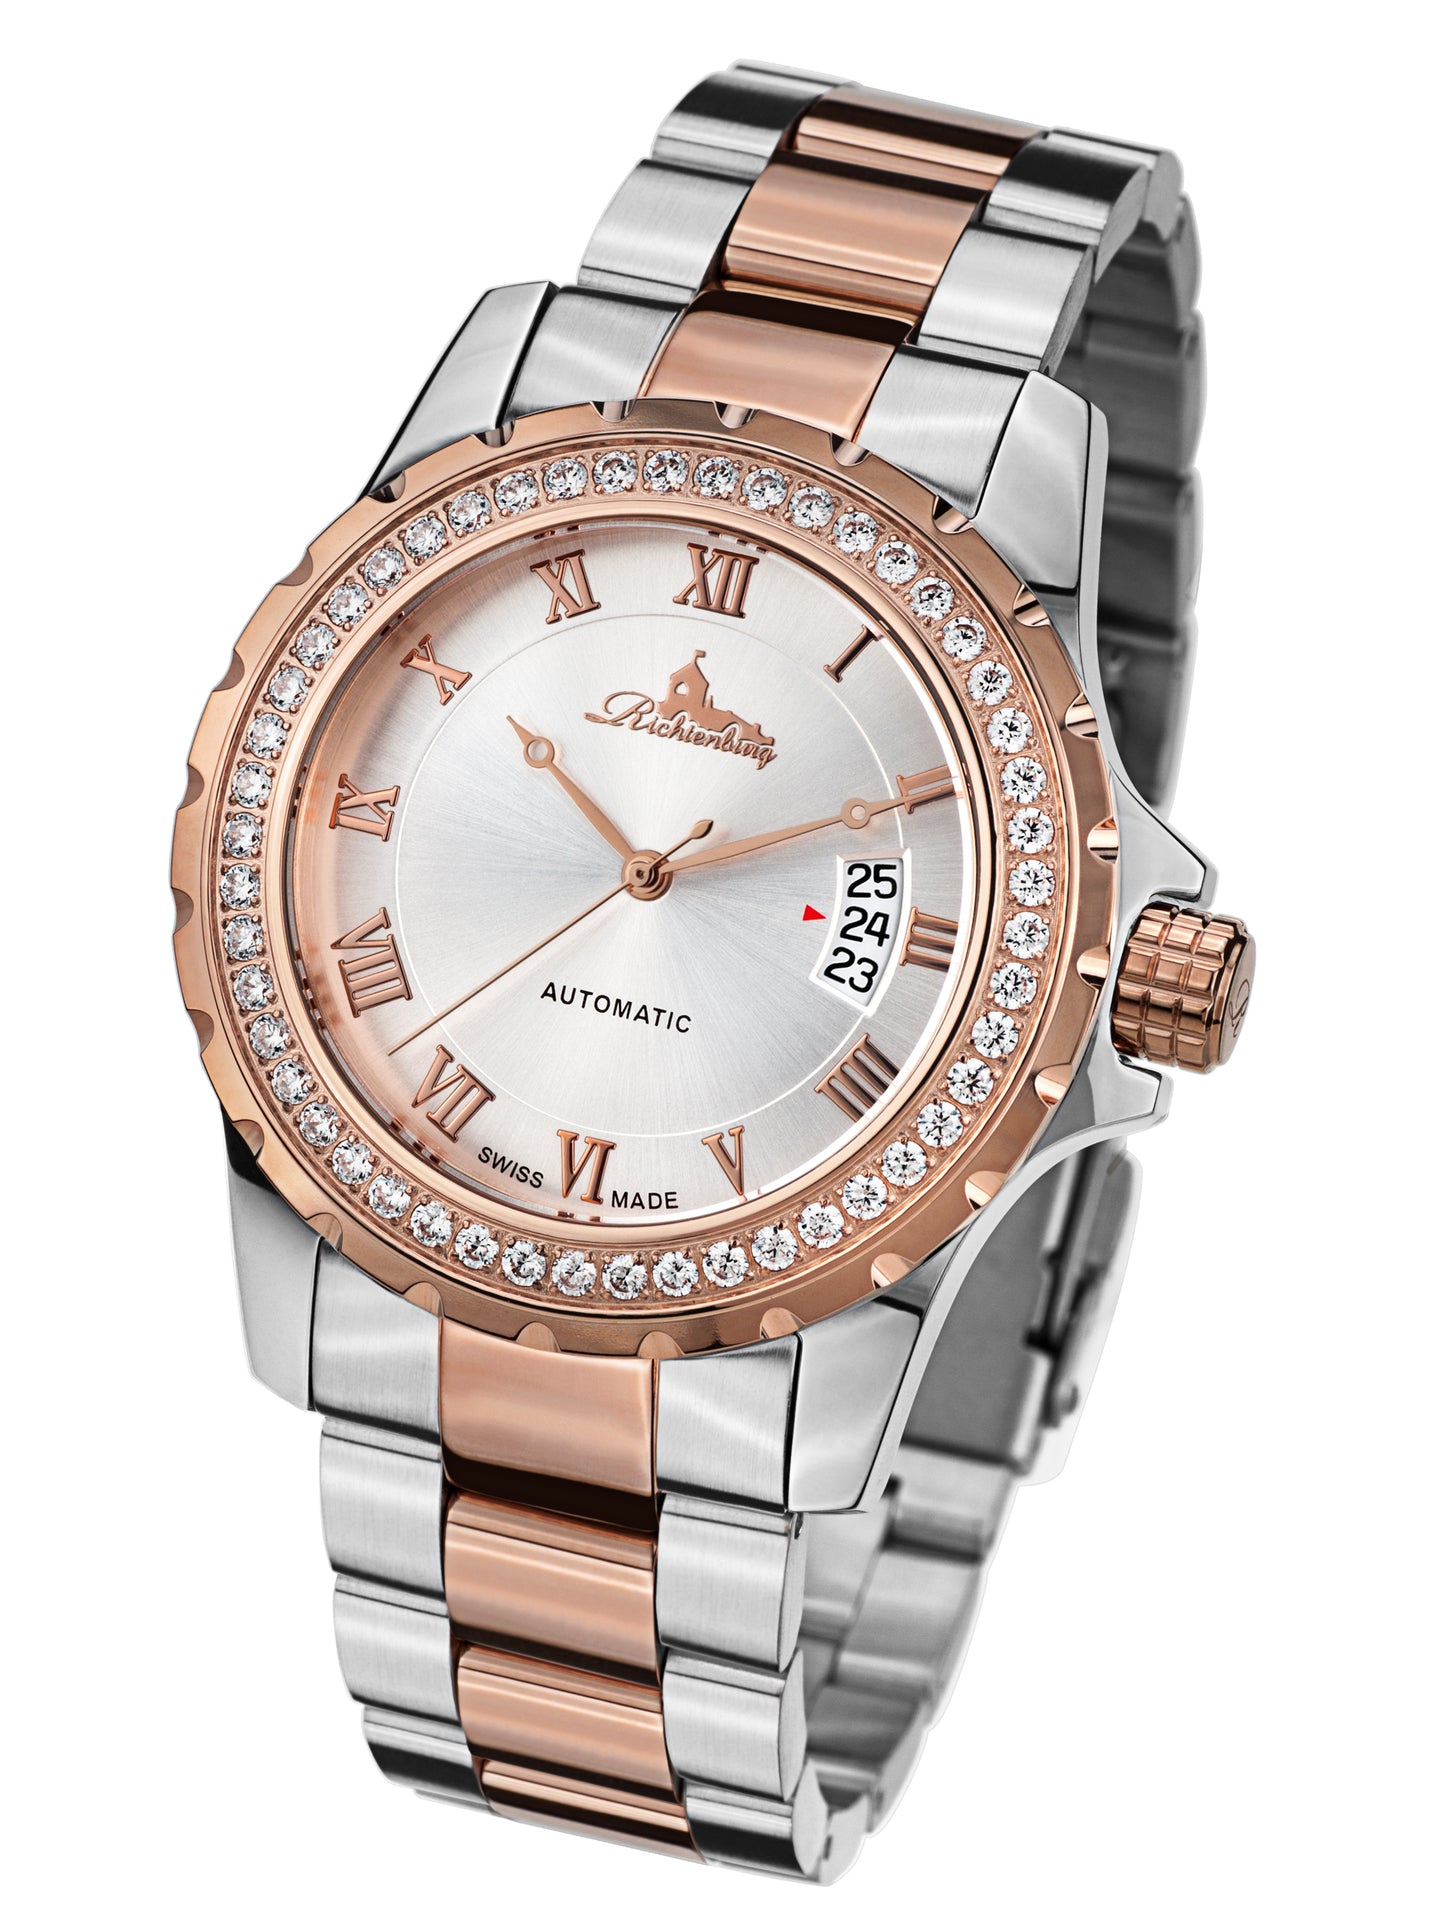 Automatic watches — Clasica — Richtenburg — rosegold IP silver two-tone